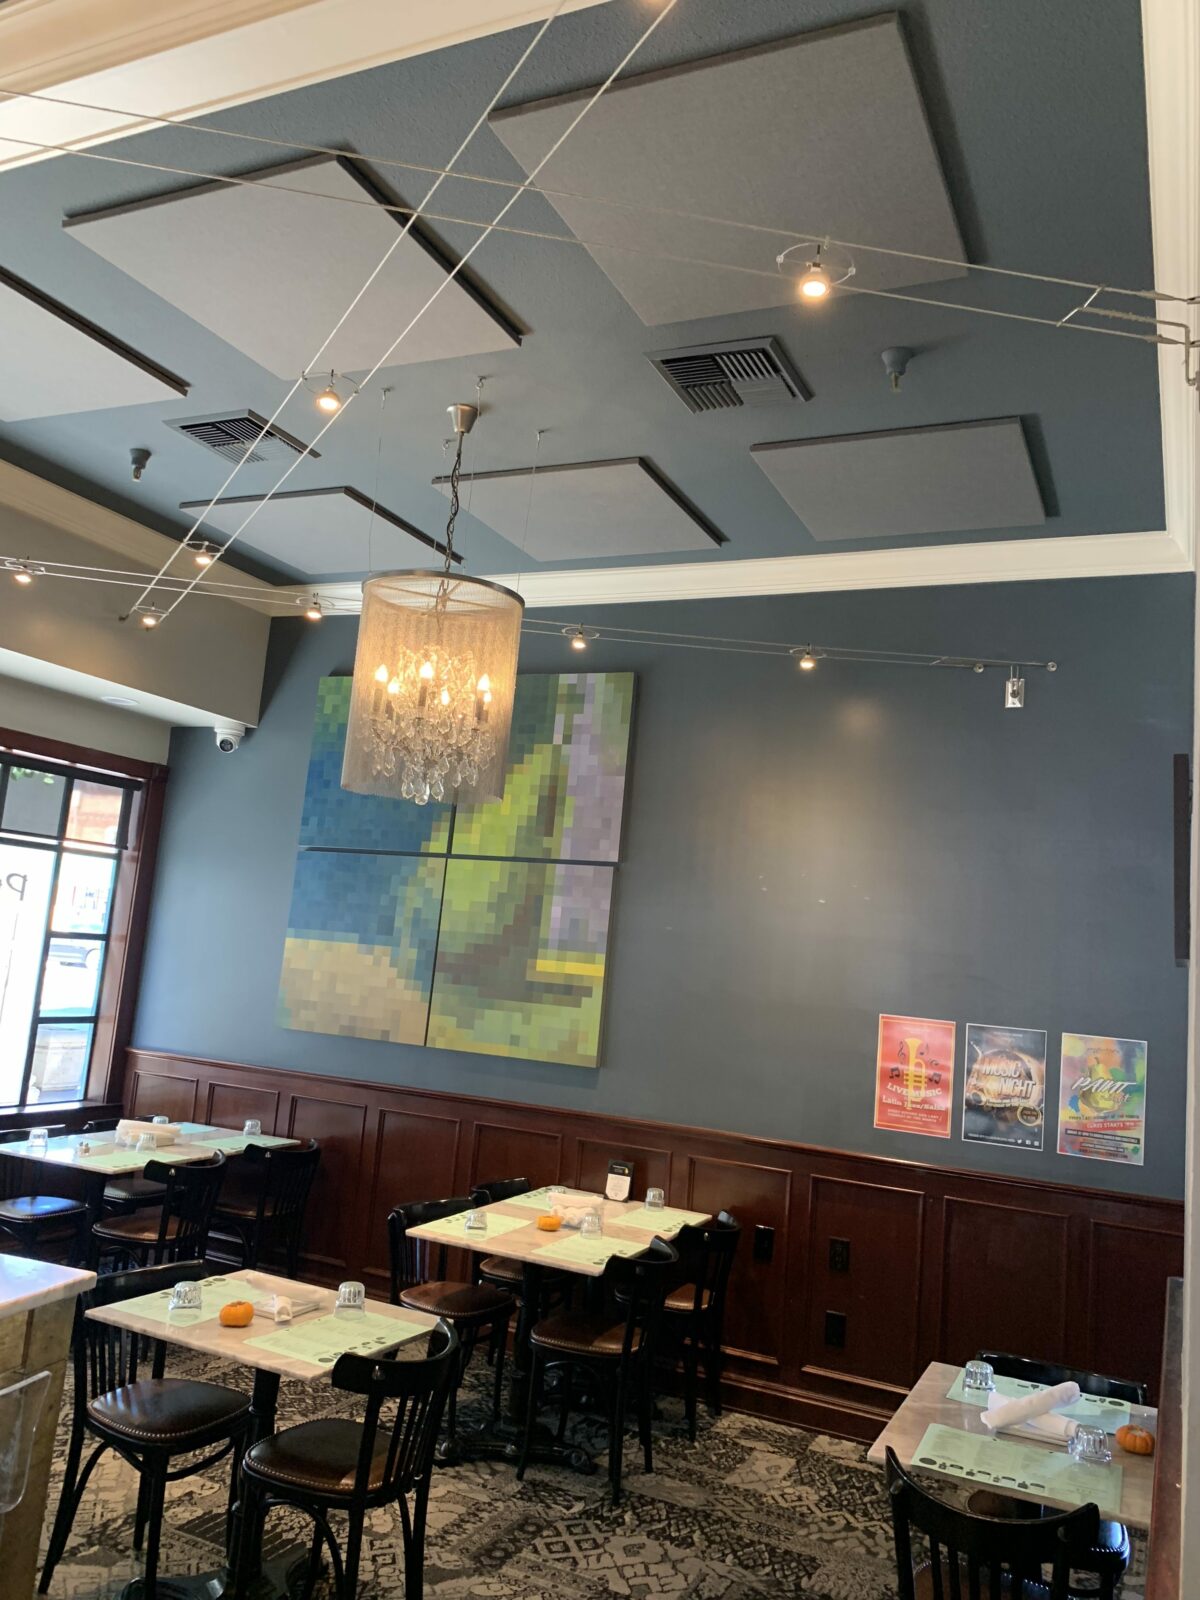 ceiling sound panels control acoustics in a restaurant